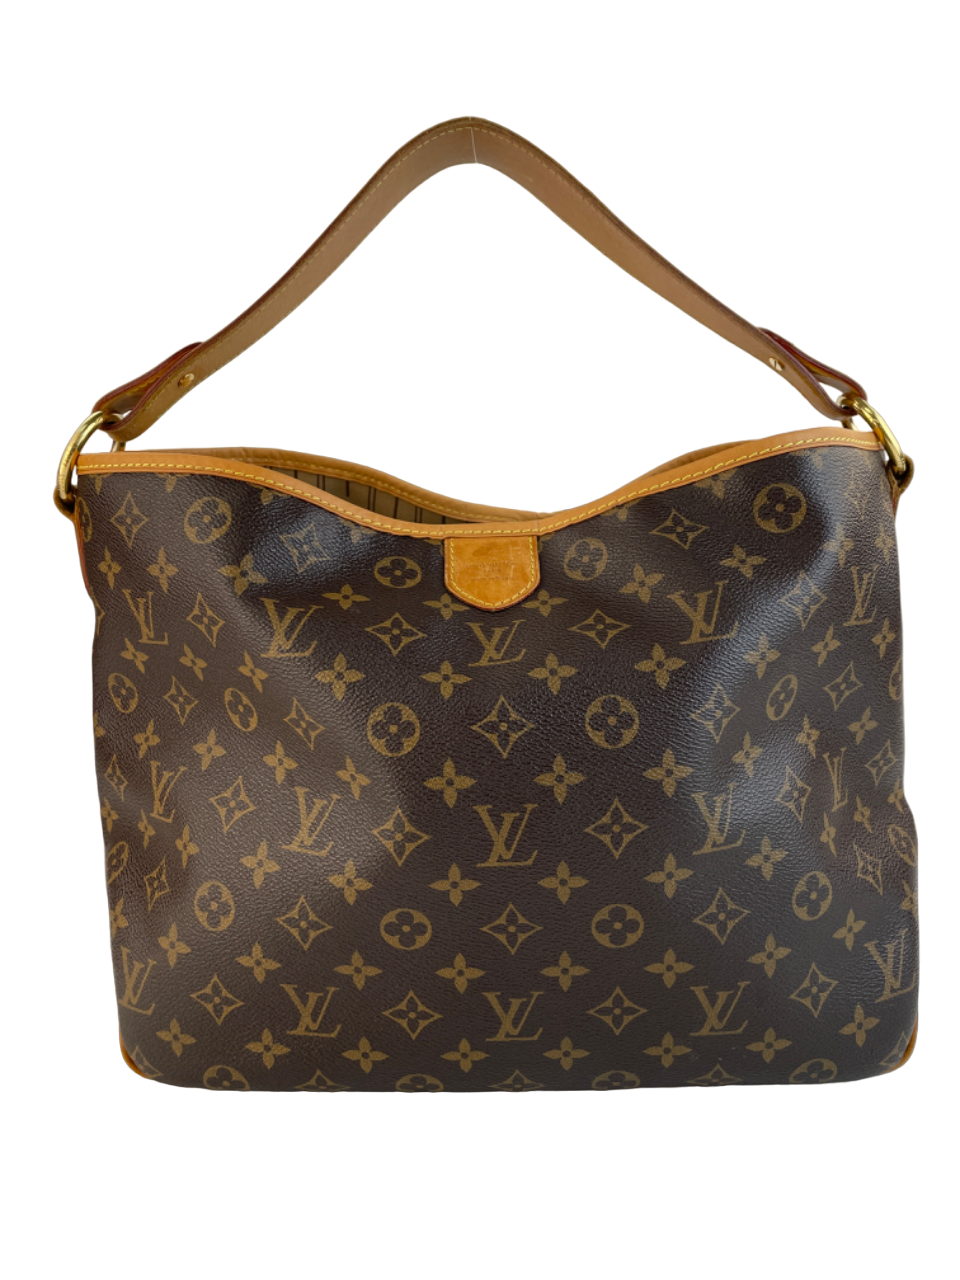 Bag and Purse Organizer with Regular Style for Louis Vuitton Delightful